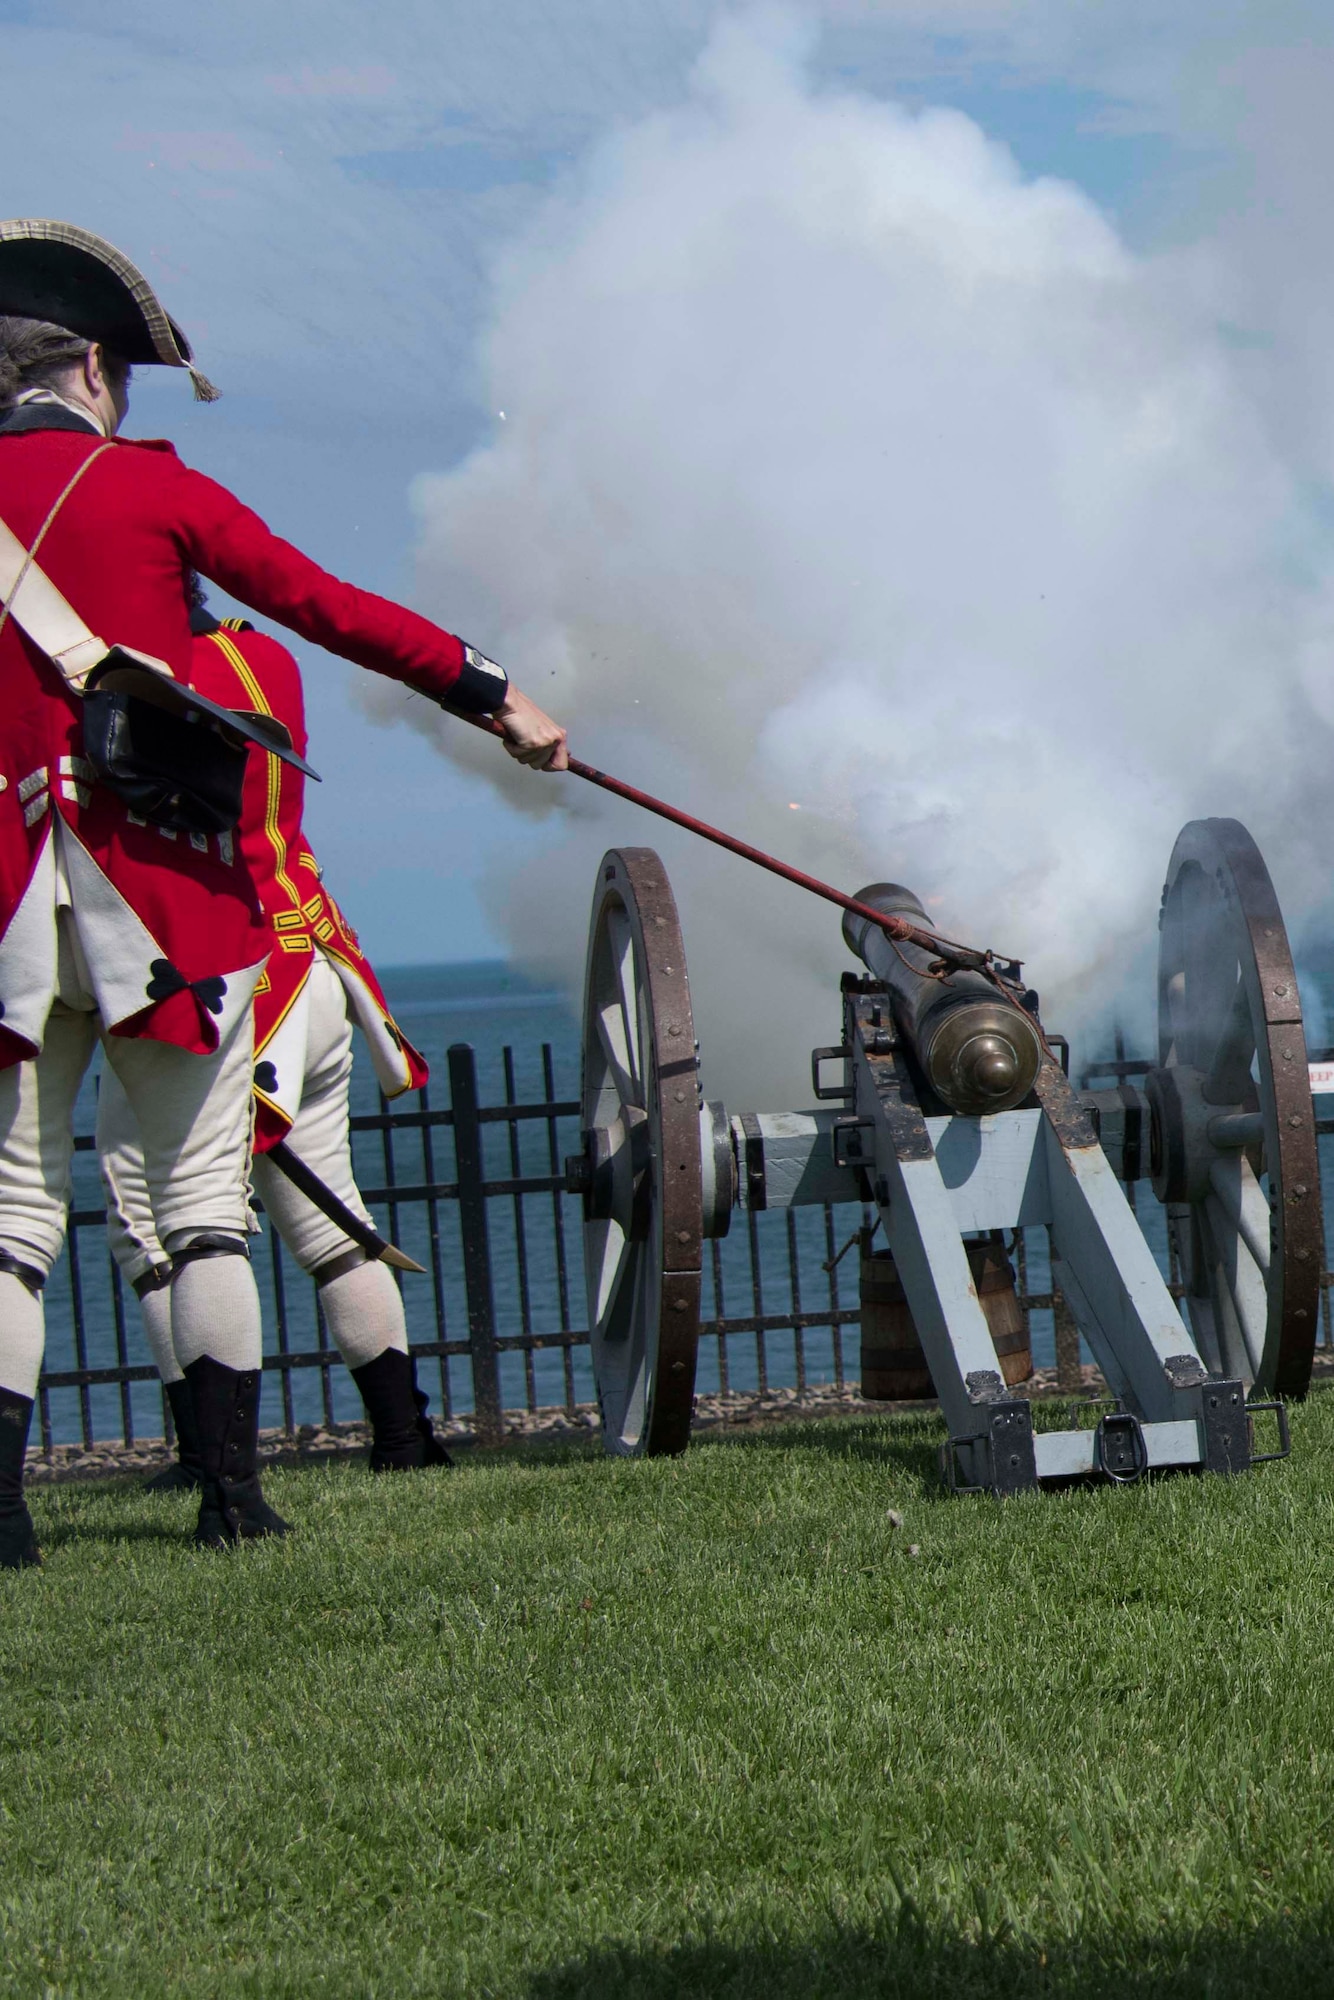 Re-enactors fire a cannon during a demonstration at Fort Niagara, New York, May 31, 2018.  Civilian leaders from the Greater Shreveport/Bossier City area visited the national historic site as part of a Civic Leader Tour hosted by the Niagara Falls Air Reserve Station.  These tours allow leaders from other areas of the country to learn more about the mission of other military units and their historical traditions.  During this tour, the Louisiana contingent learned about the capabilities and mission of the 914th Air Refueling Wing, the 107th Attack Wing, the Niagara Falls Military Entrance Processing Station and the U.S. Coast Guard Buffalo Sector.  (U.S. Air Force photo by Master Sgt. Ted Daigle/released)